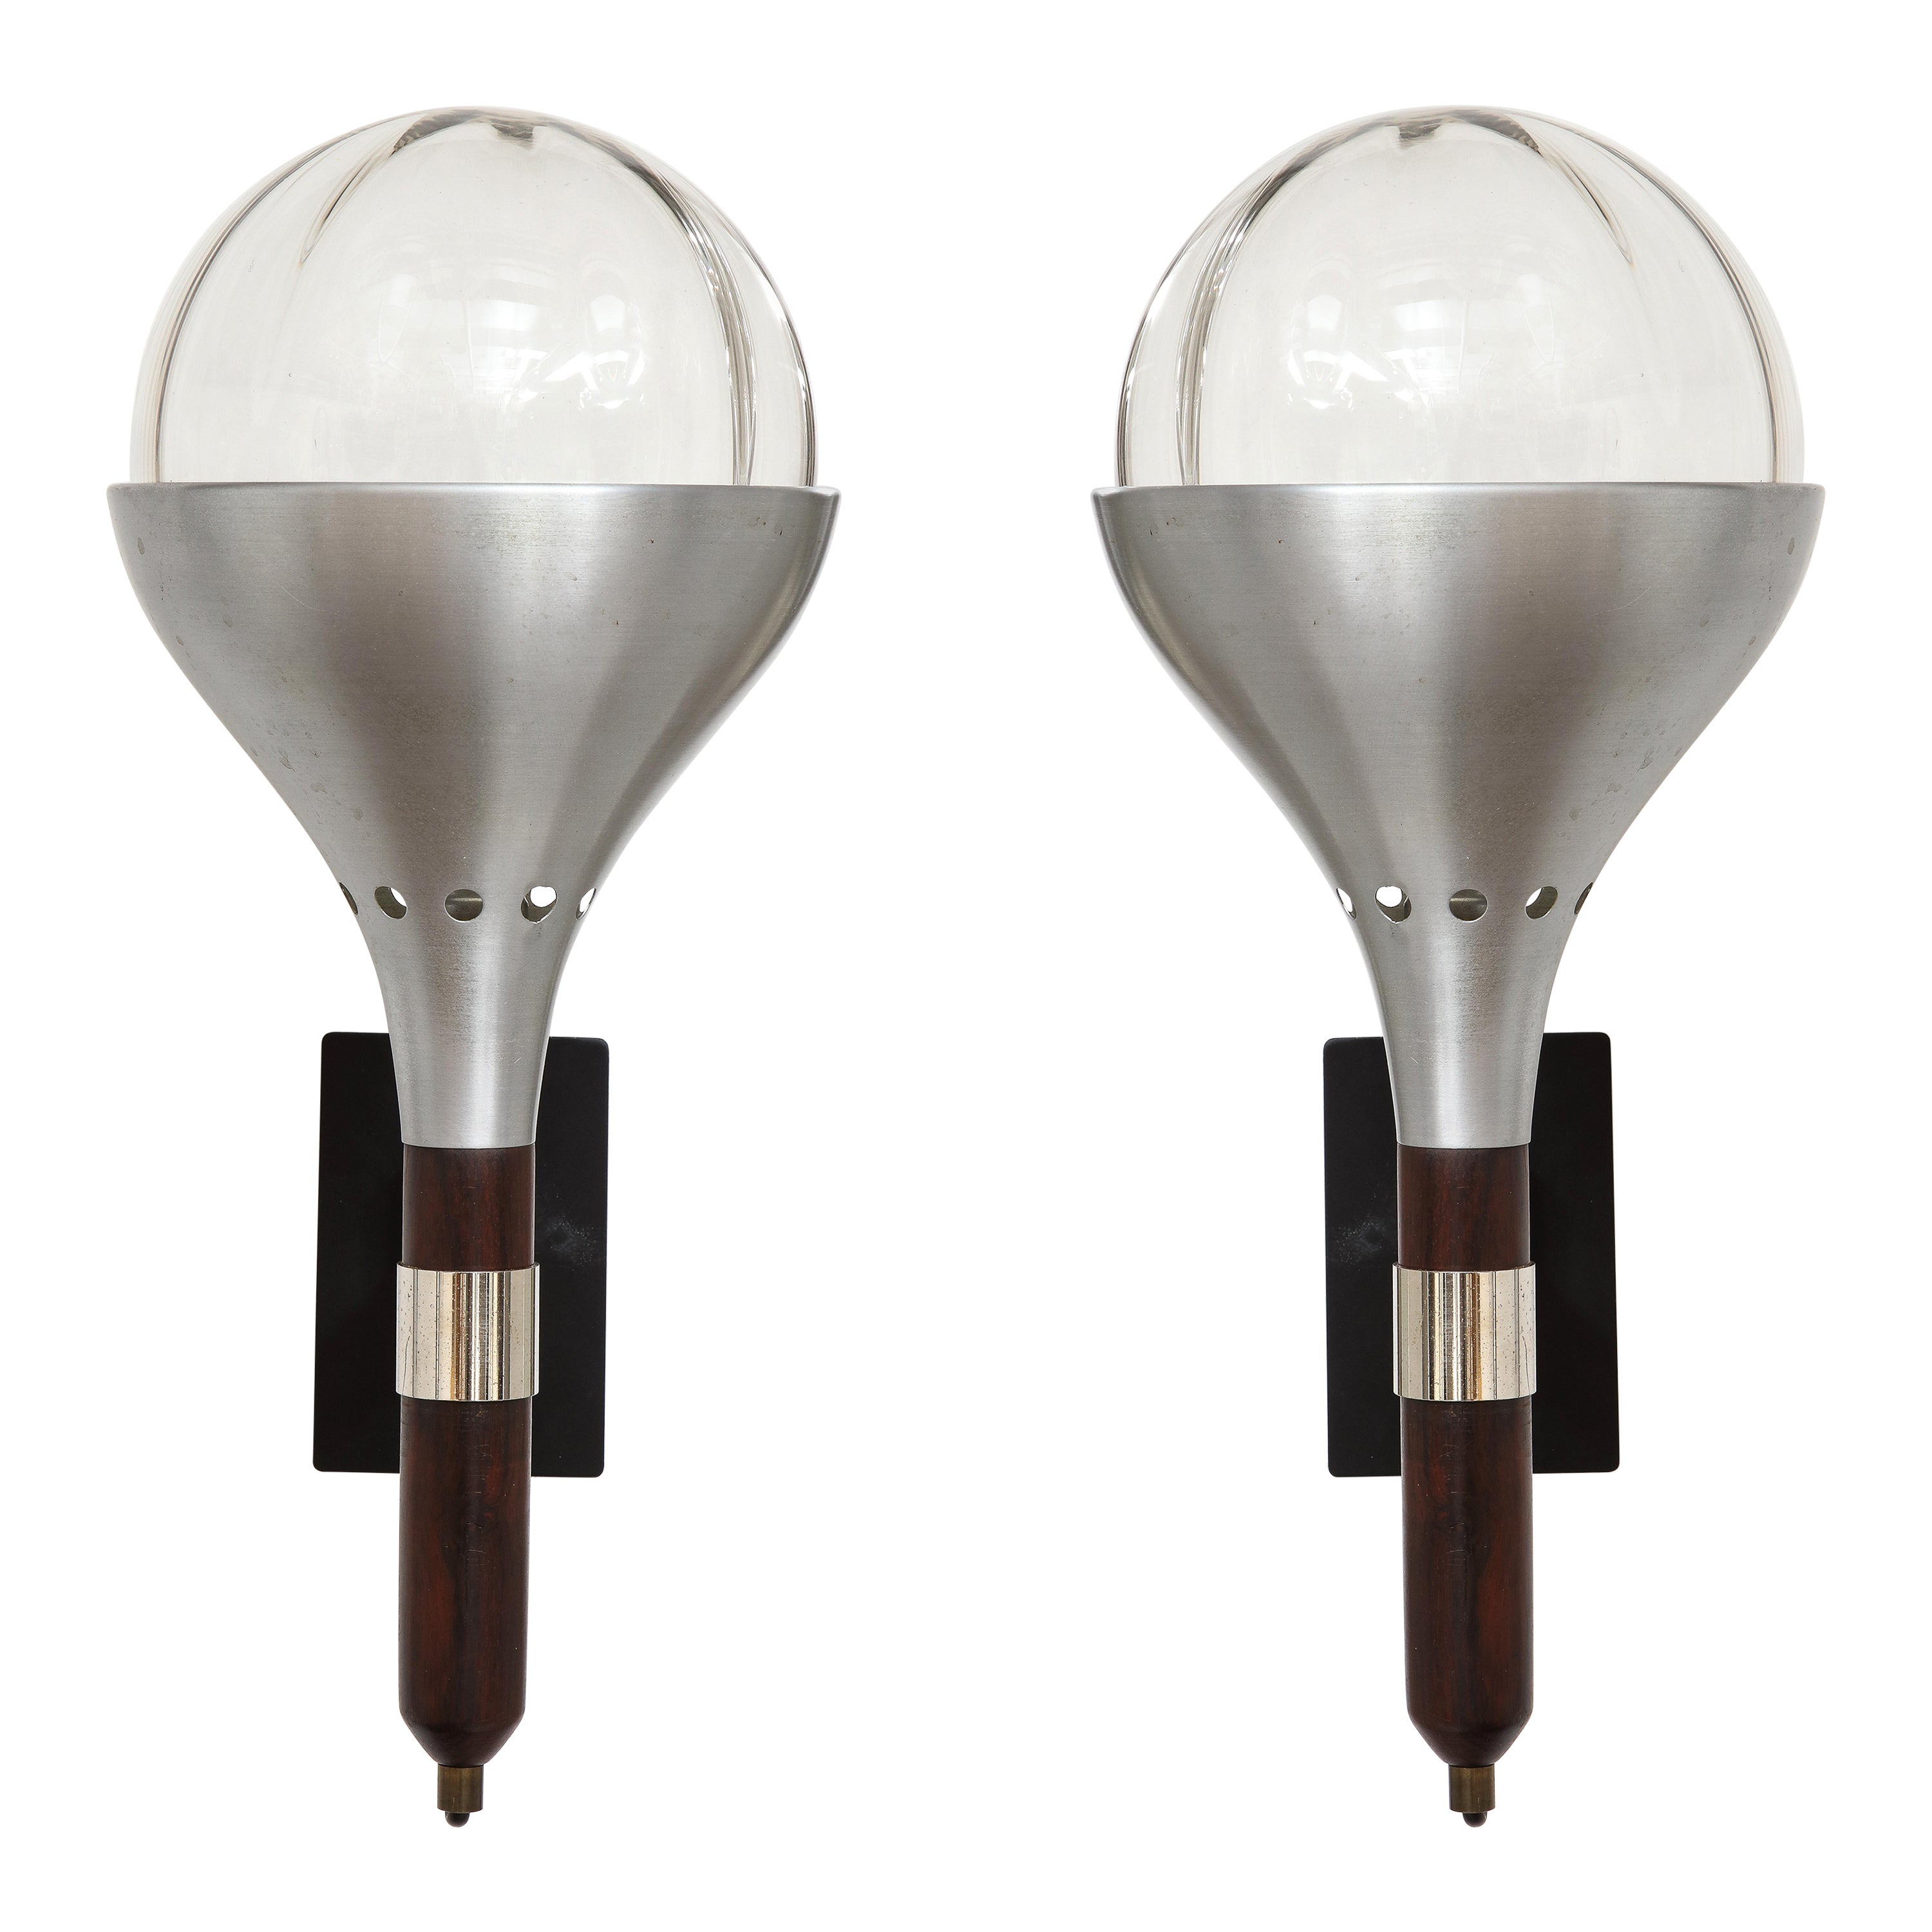 Pair of Italian 1940's Walnut and Nickel Plated Wall Sconces For Sale